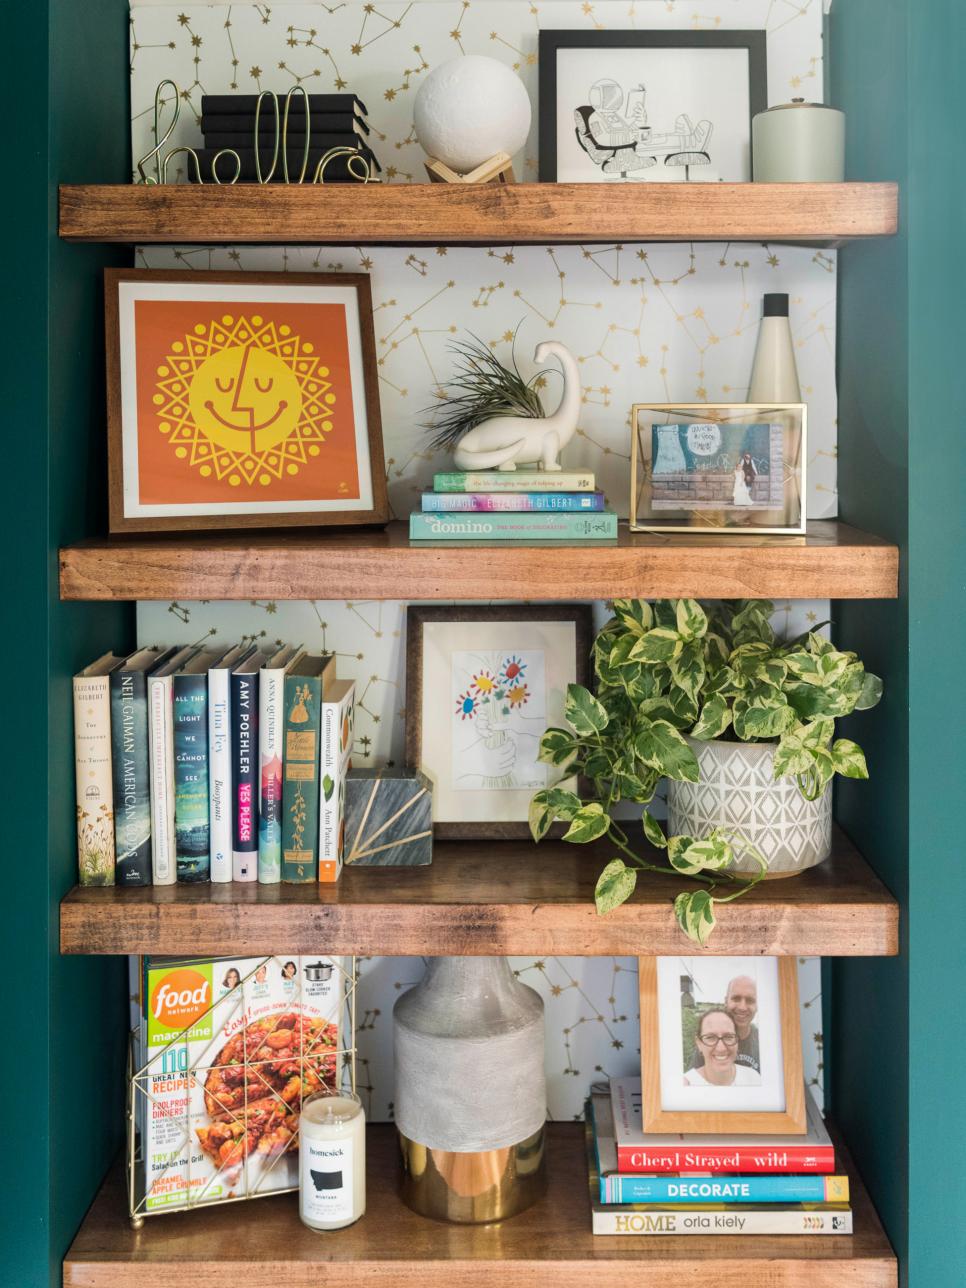 Built-In Bookcase is Lined With Removable Constellation Wallpaper | HGTV